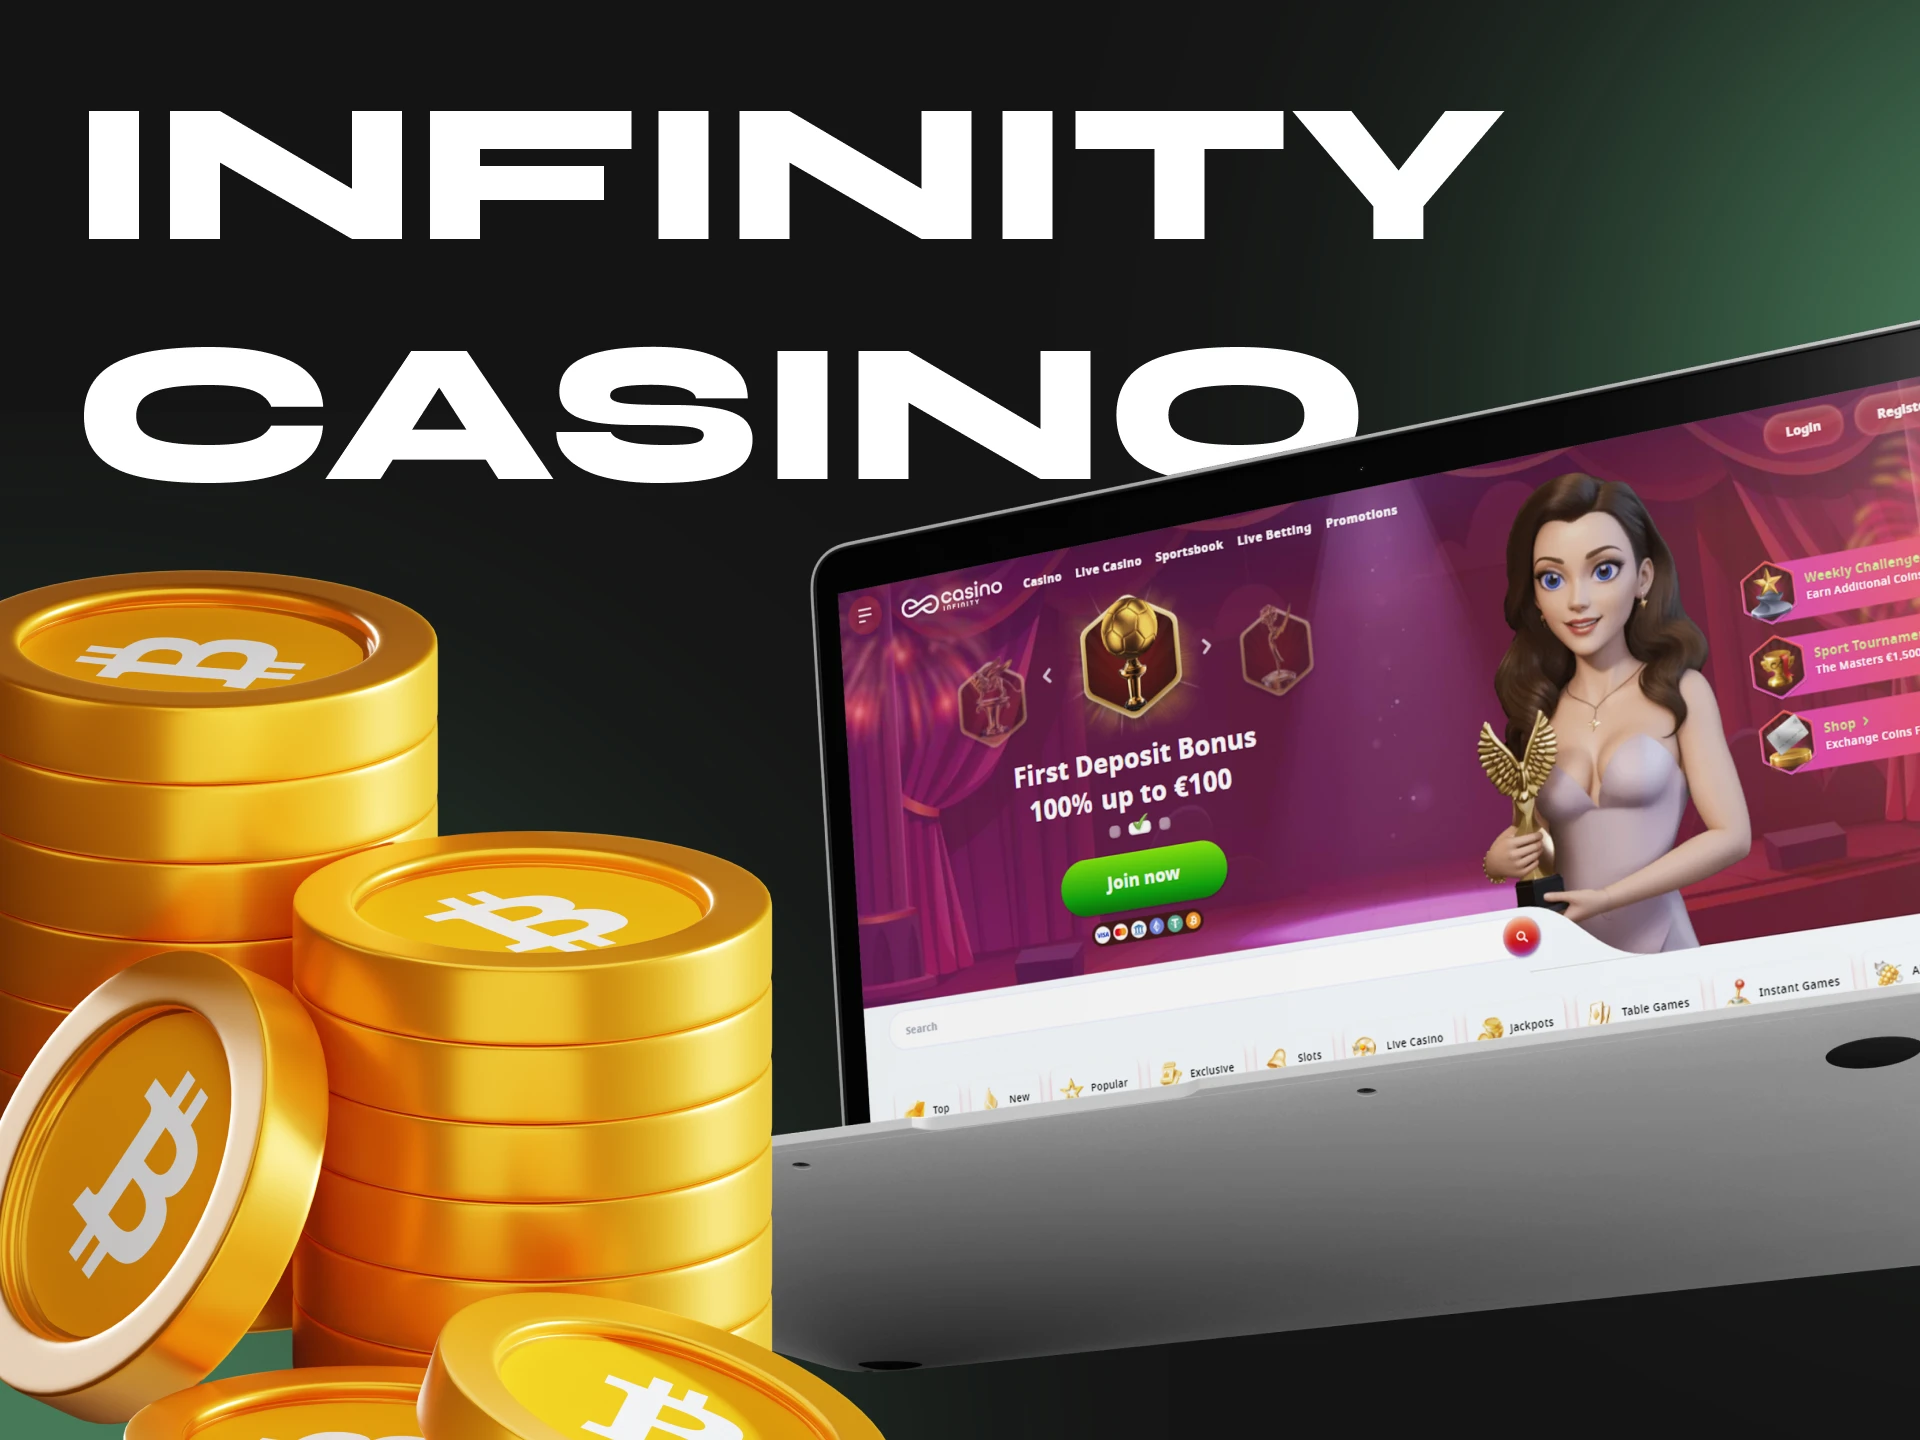 Infinity Casino has a varied selection of games and is considered one of the best.